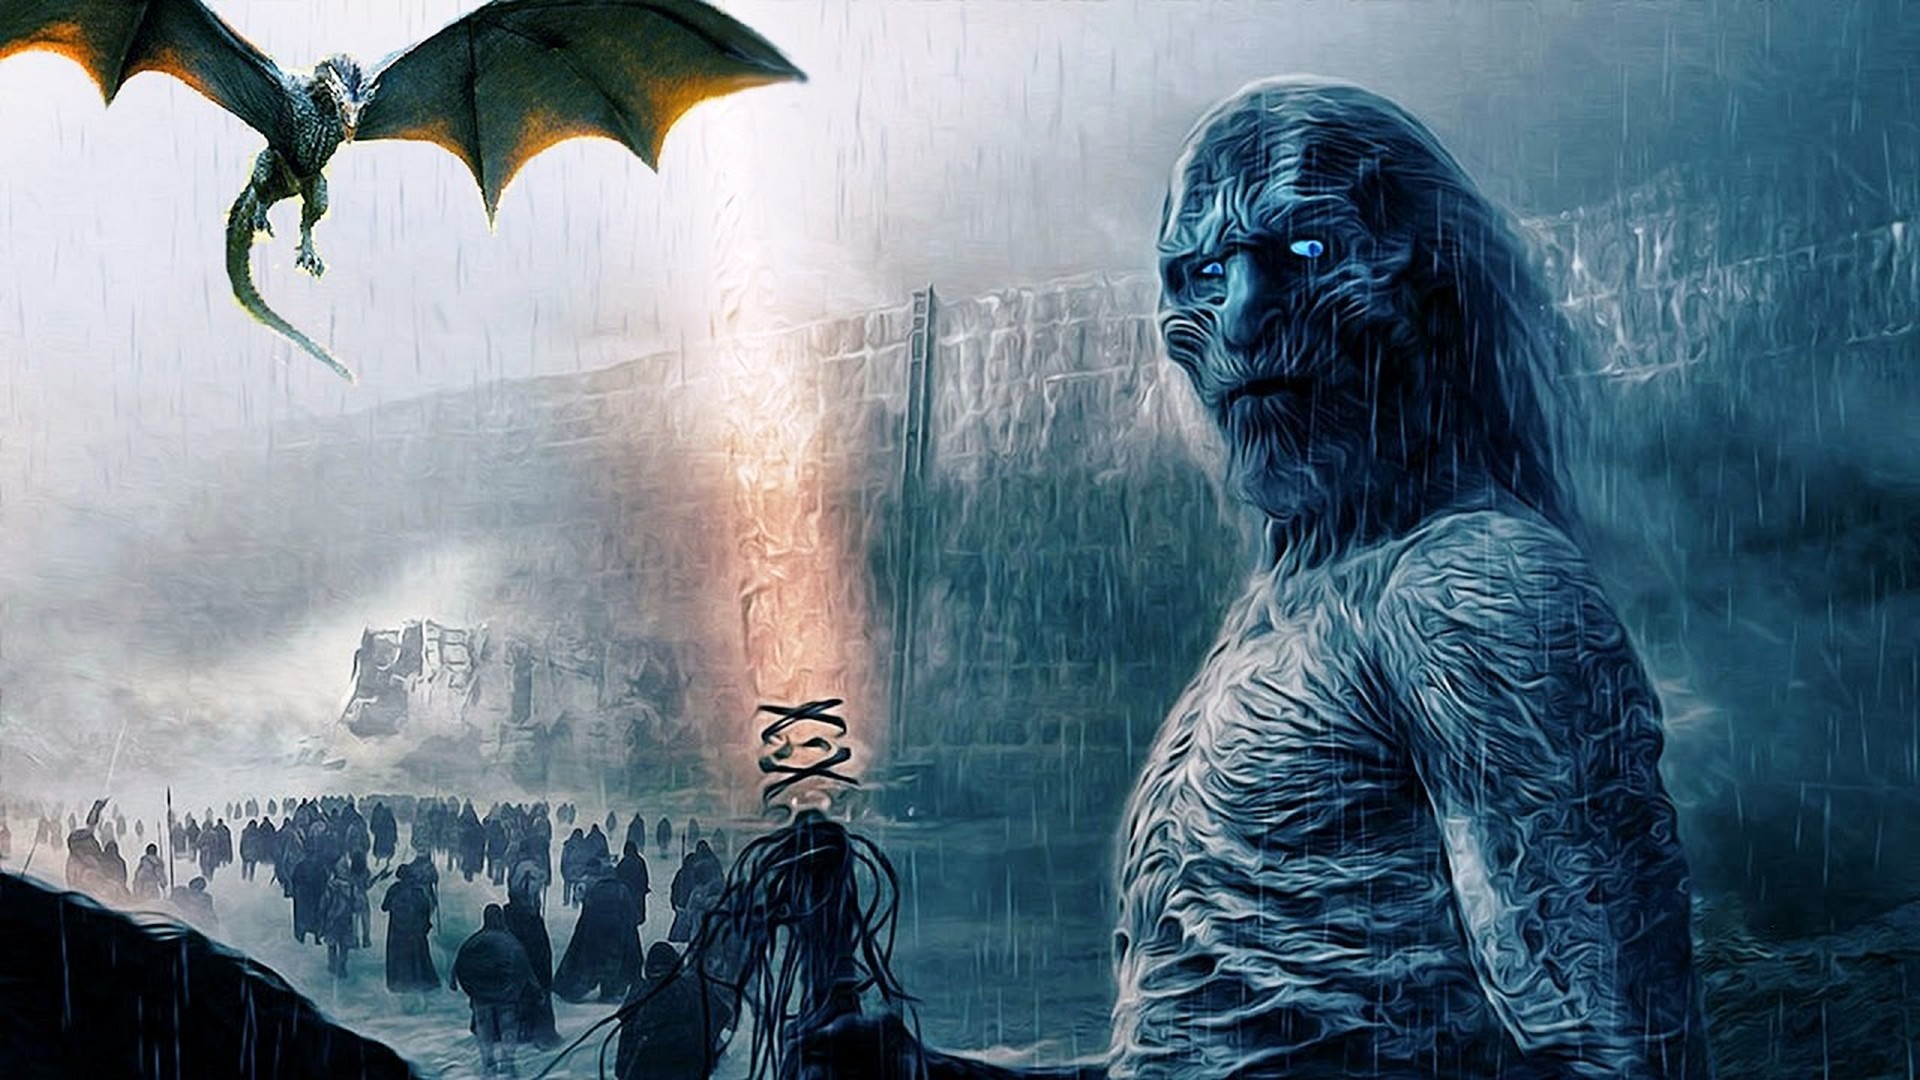 Game Of Thrones White Walkers Wallpaper Hd With High-resolution - Game Of Thrones Season 7 Episode 7 Leak - HD Wallpaper 